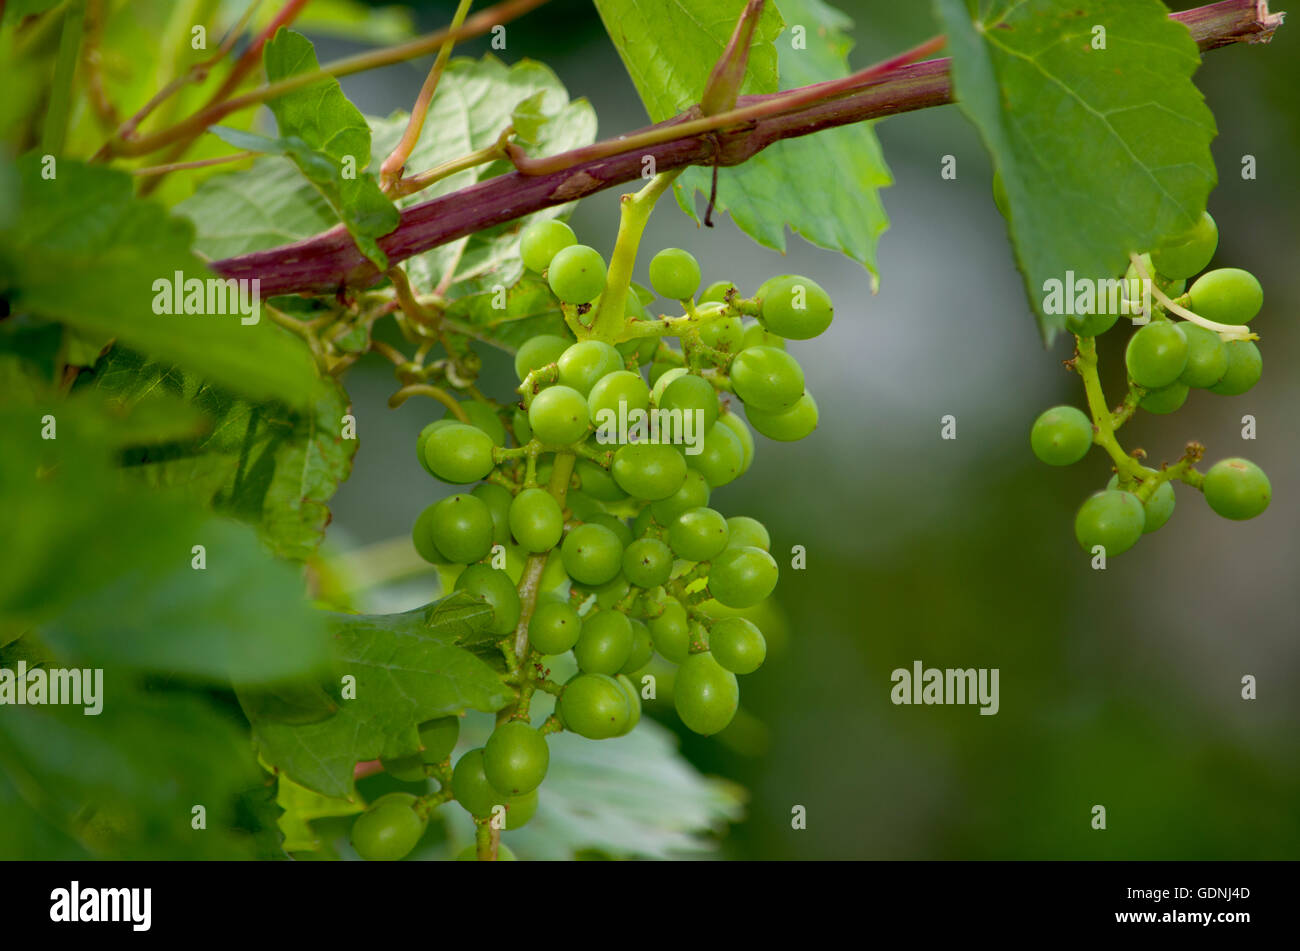 Grapes green on a bush unripe,a bush, a garden, berry, food, gardening, grapes, green, leaves, on a branch, unripe Stock Photo